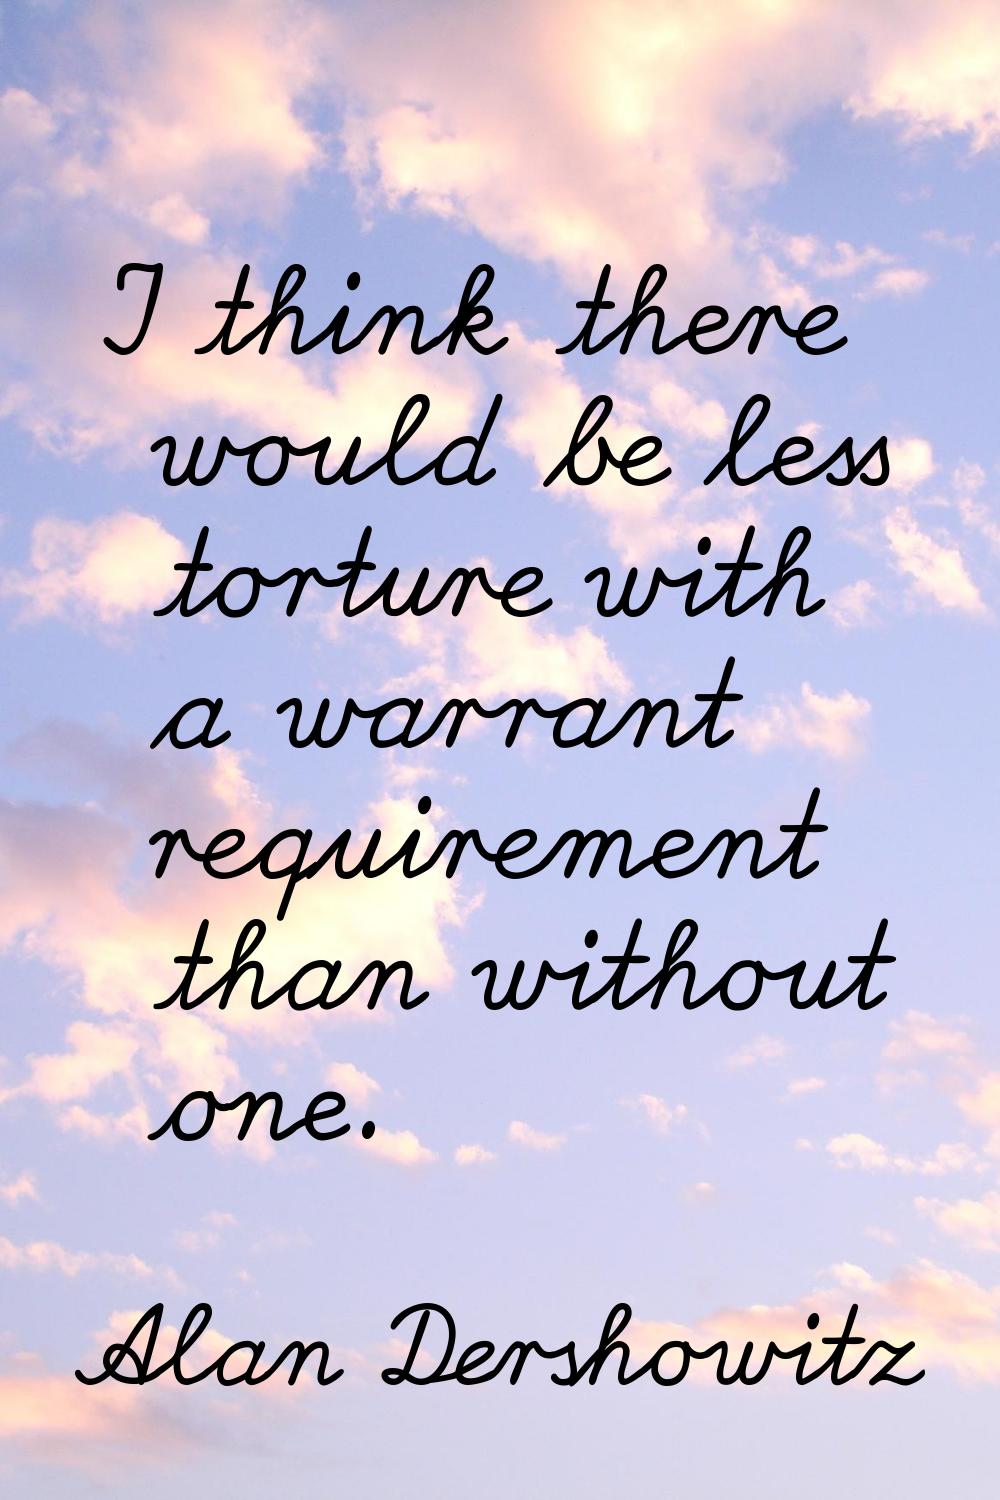 I think there would be less torture with a warrant requirement than without one.